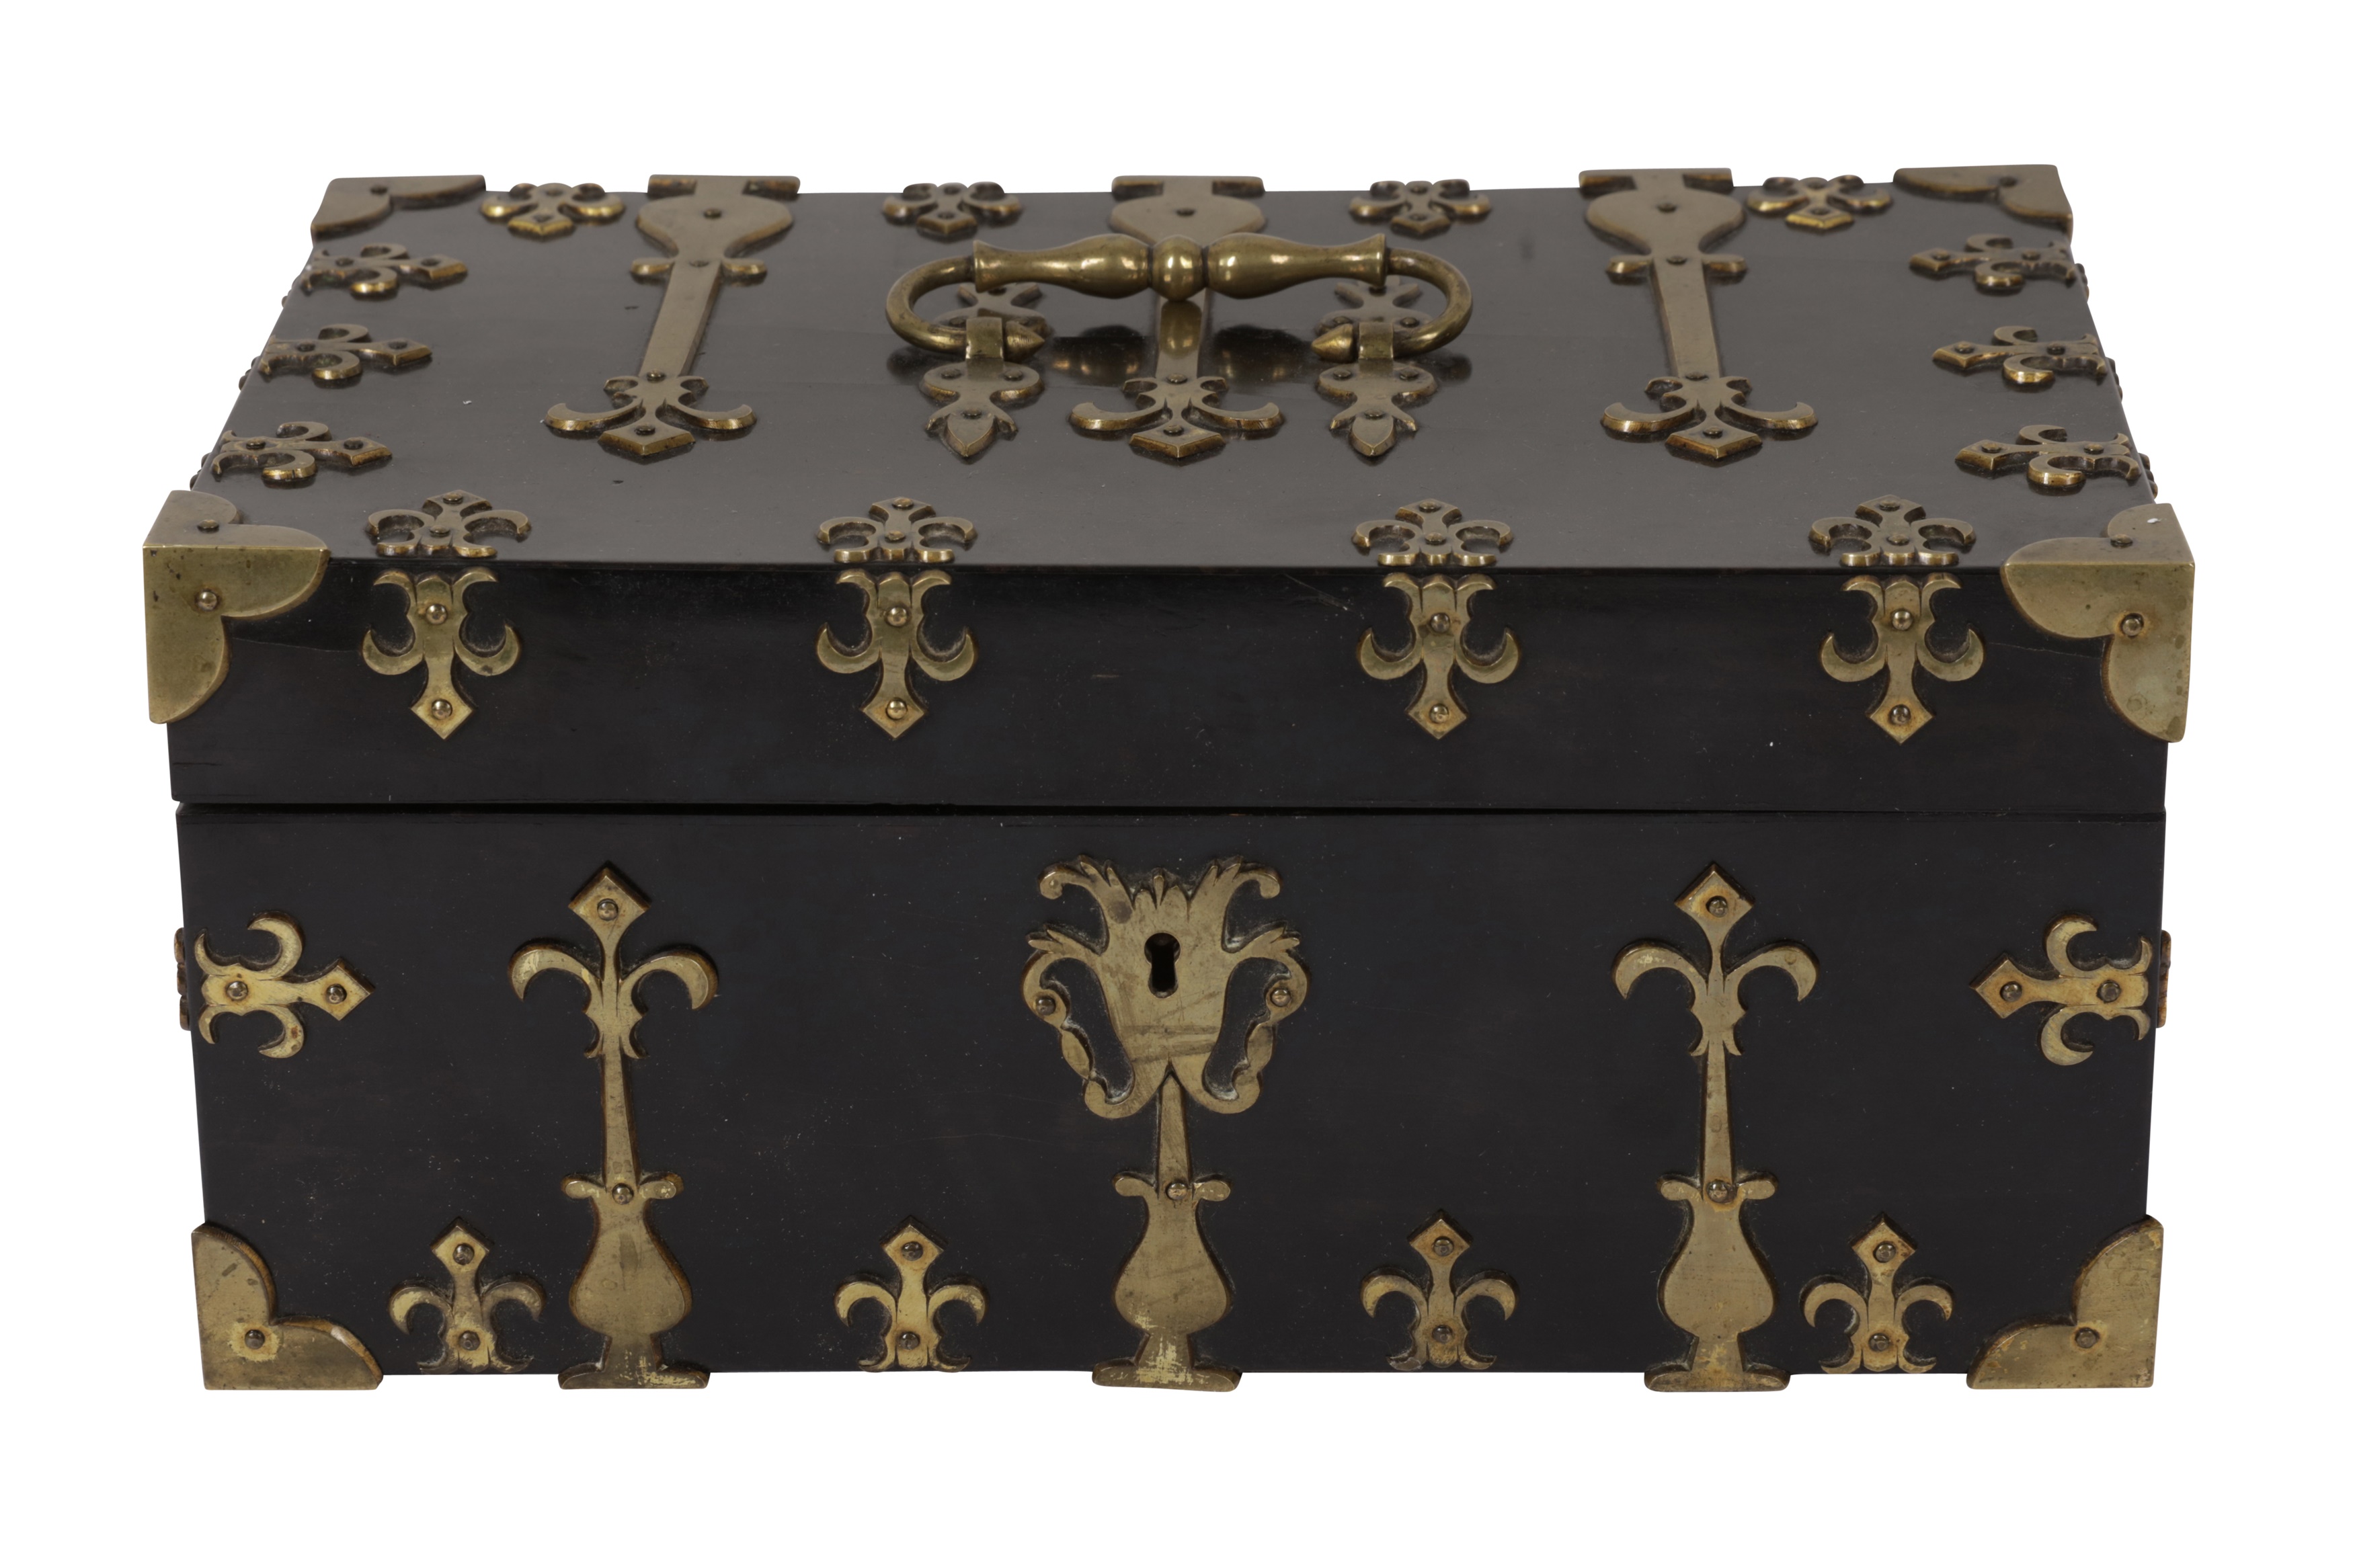 A LATE VICTORIAN ENGLISH GOTHIC REVIVAL BRASS MOUNTED EBONY STATIONARY BOX - Image 2 of 5